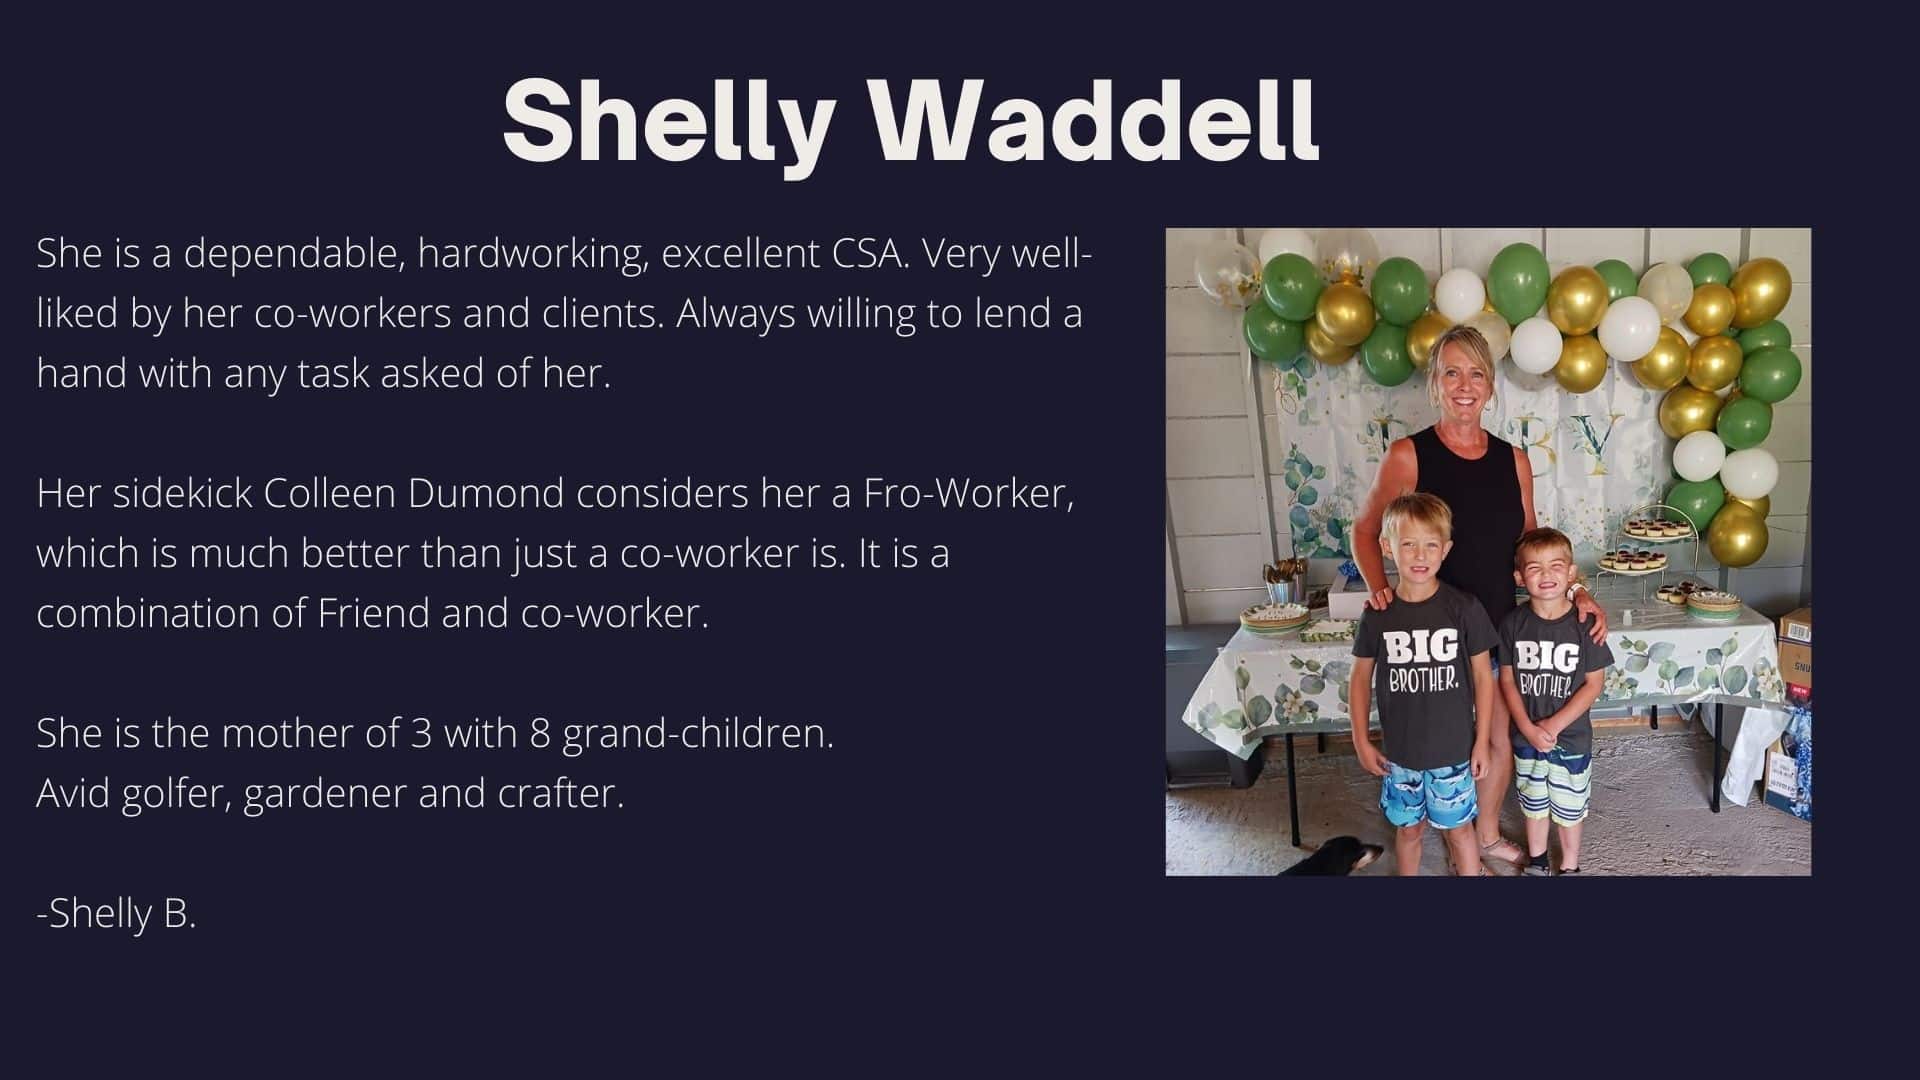 Shelly Waddell 25 years